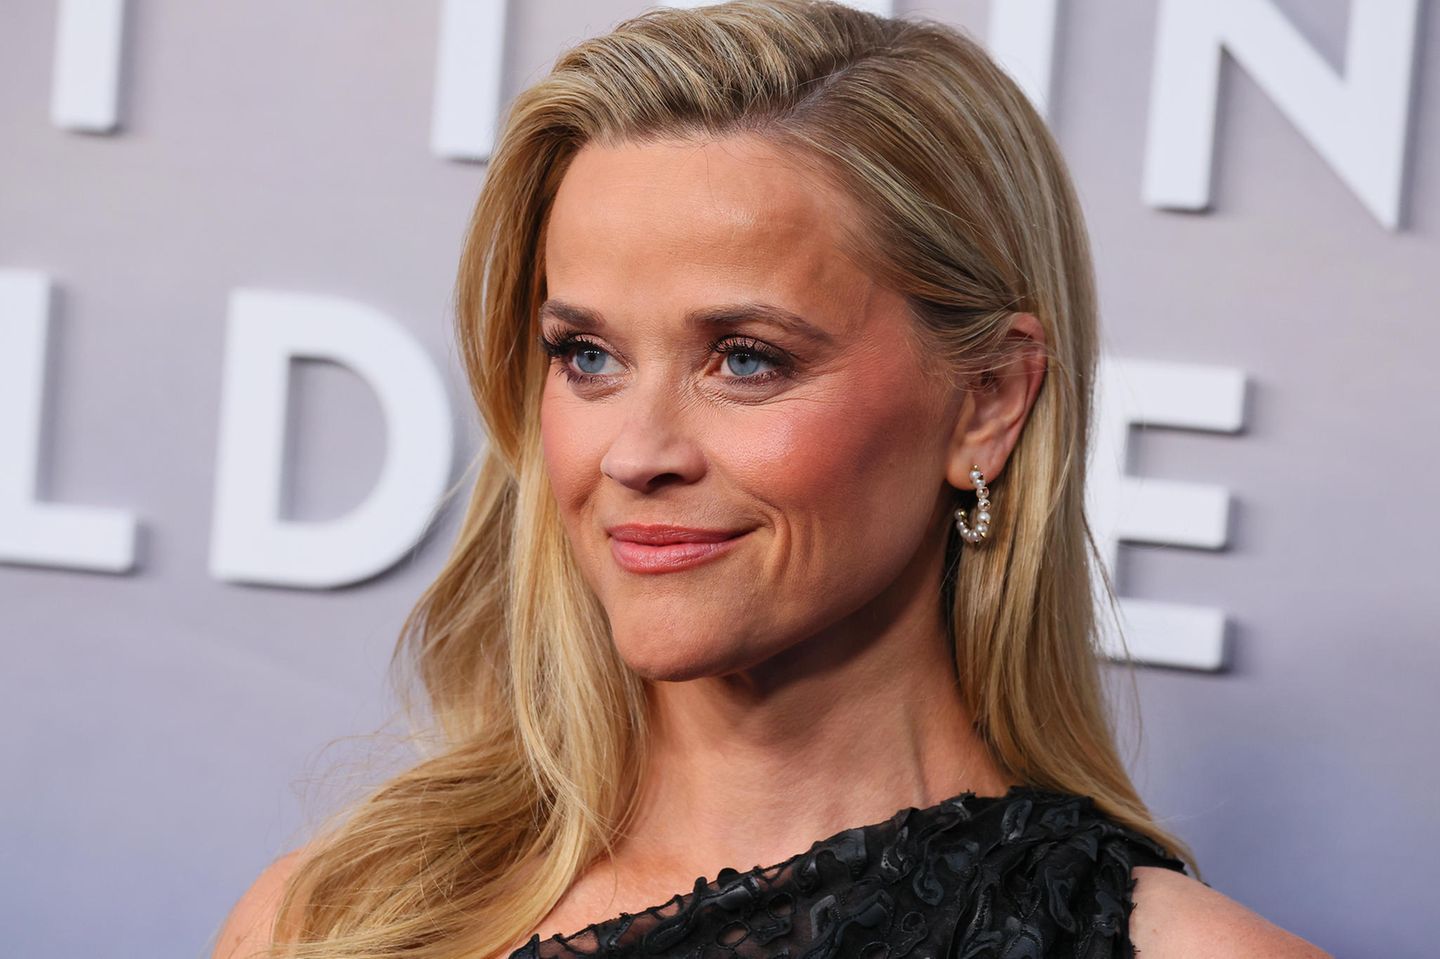 Reese Witherspoon = Laura Jeanne Reese Witherspoon